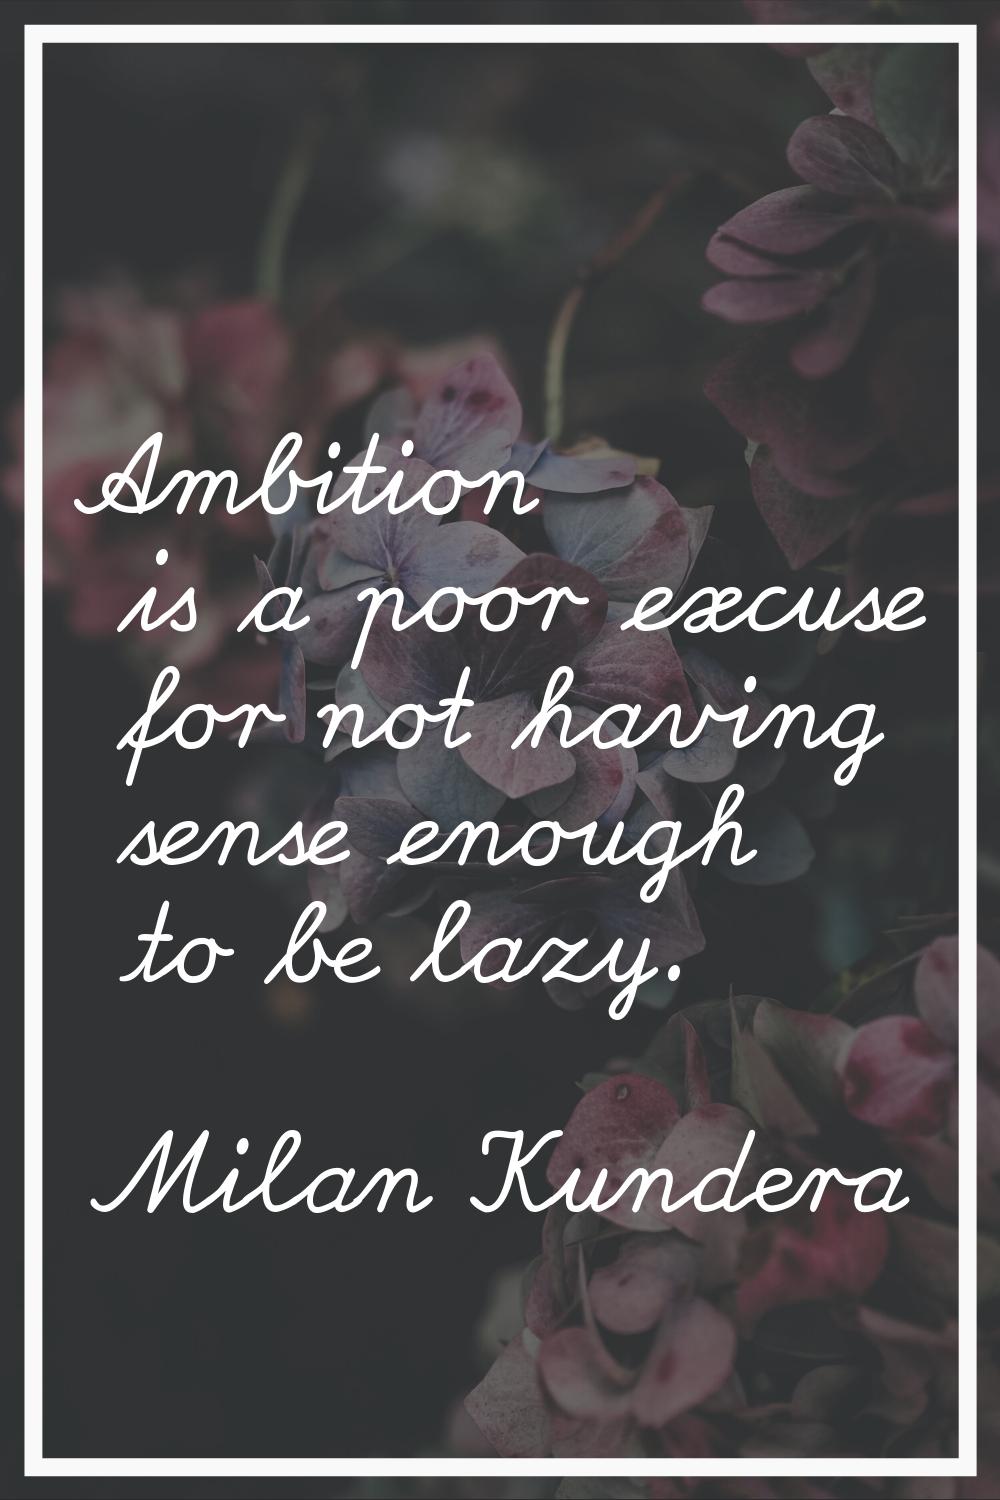 Ambition is a poor excuse for not having sense enough to be lazy.